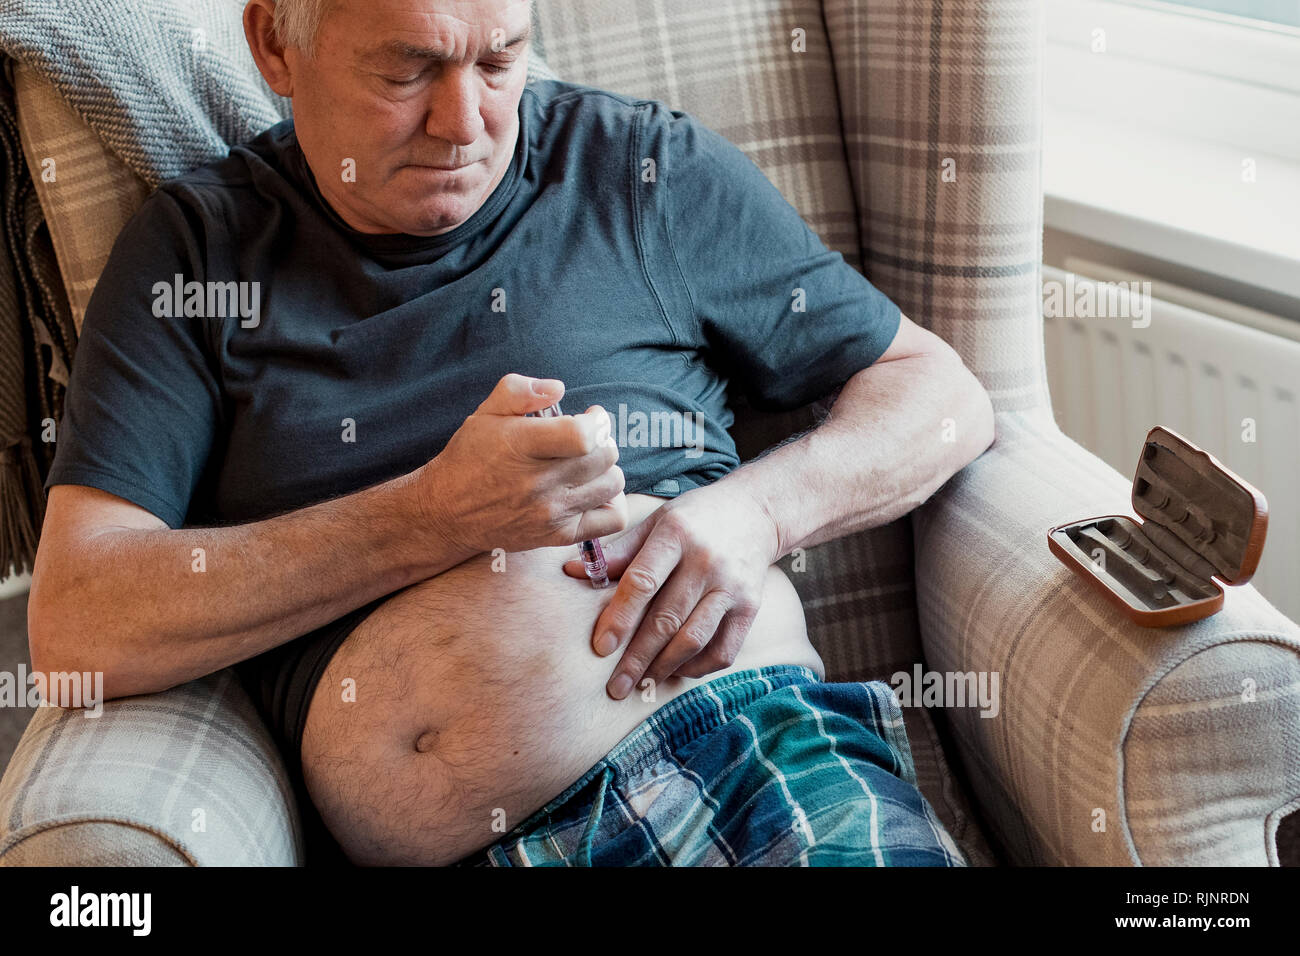 Senior man with diabetes is injecting insulin into his belly at home. Stock Photo